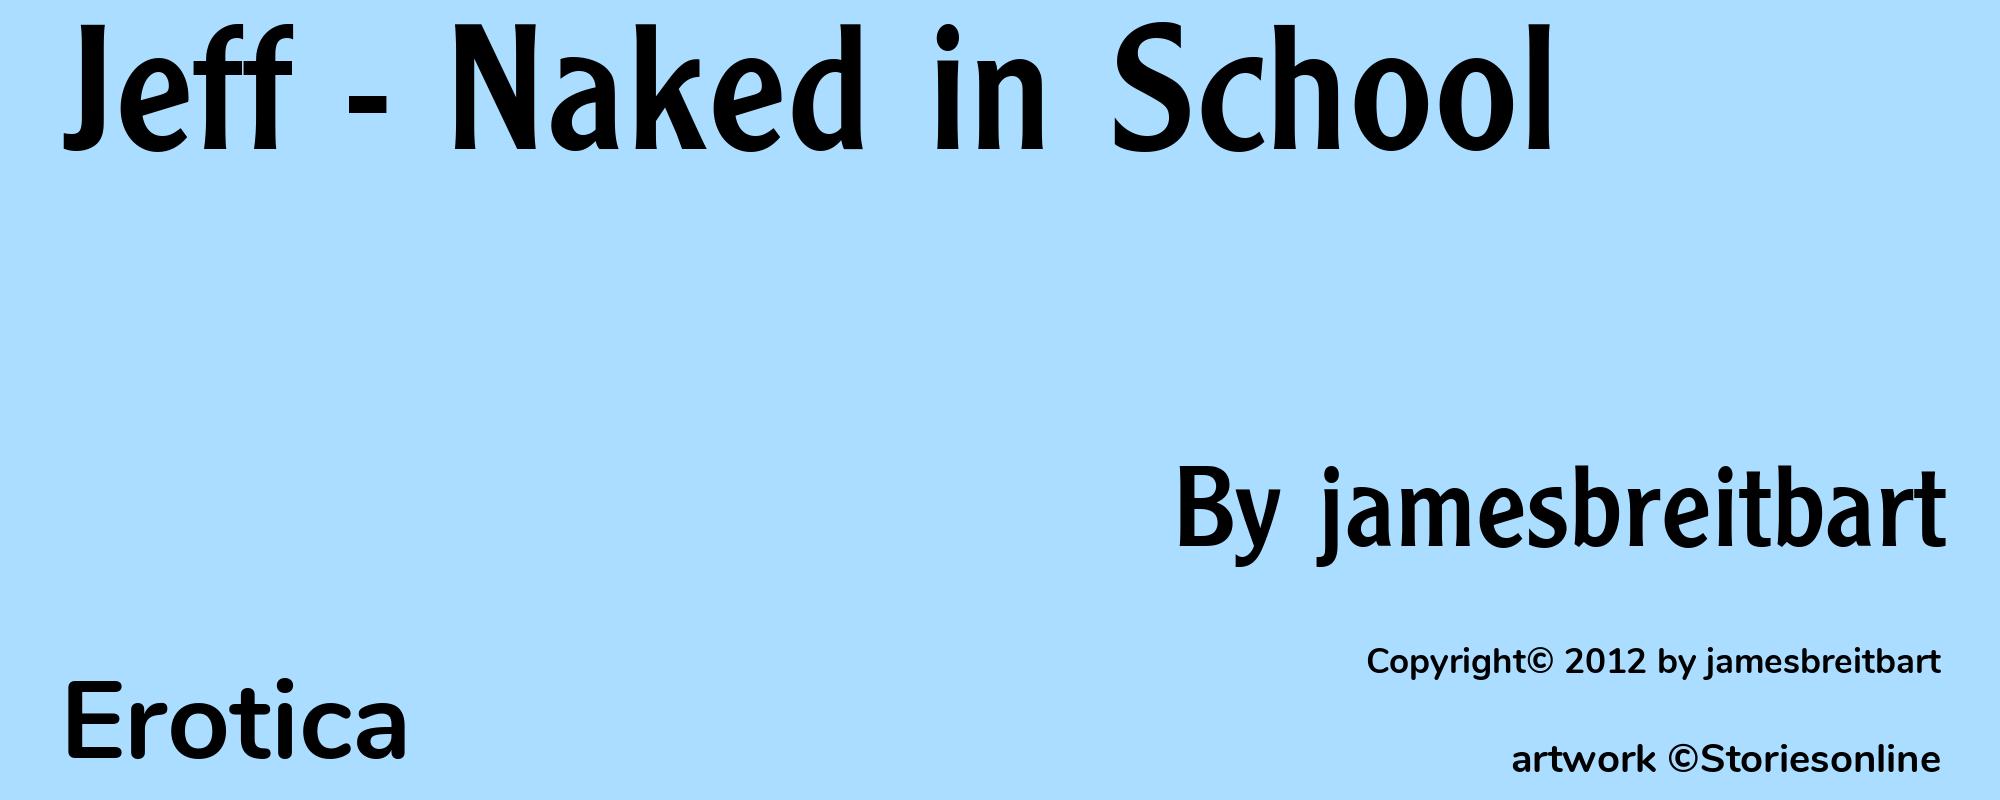 Jeff - Naked in School - Cover